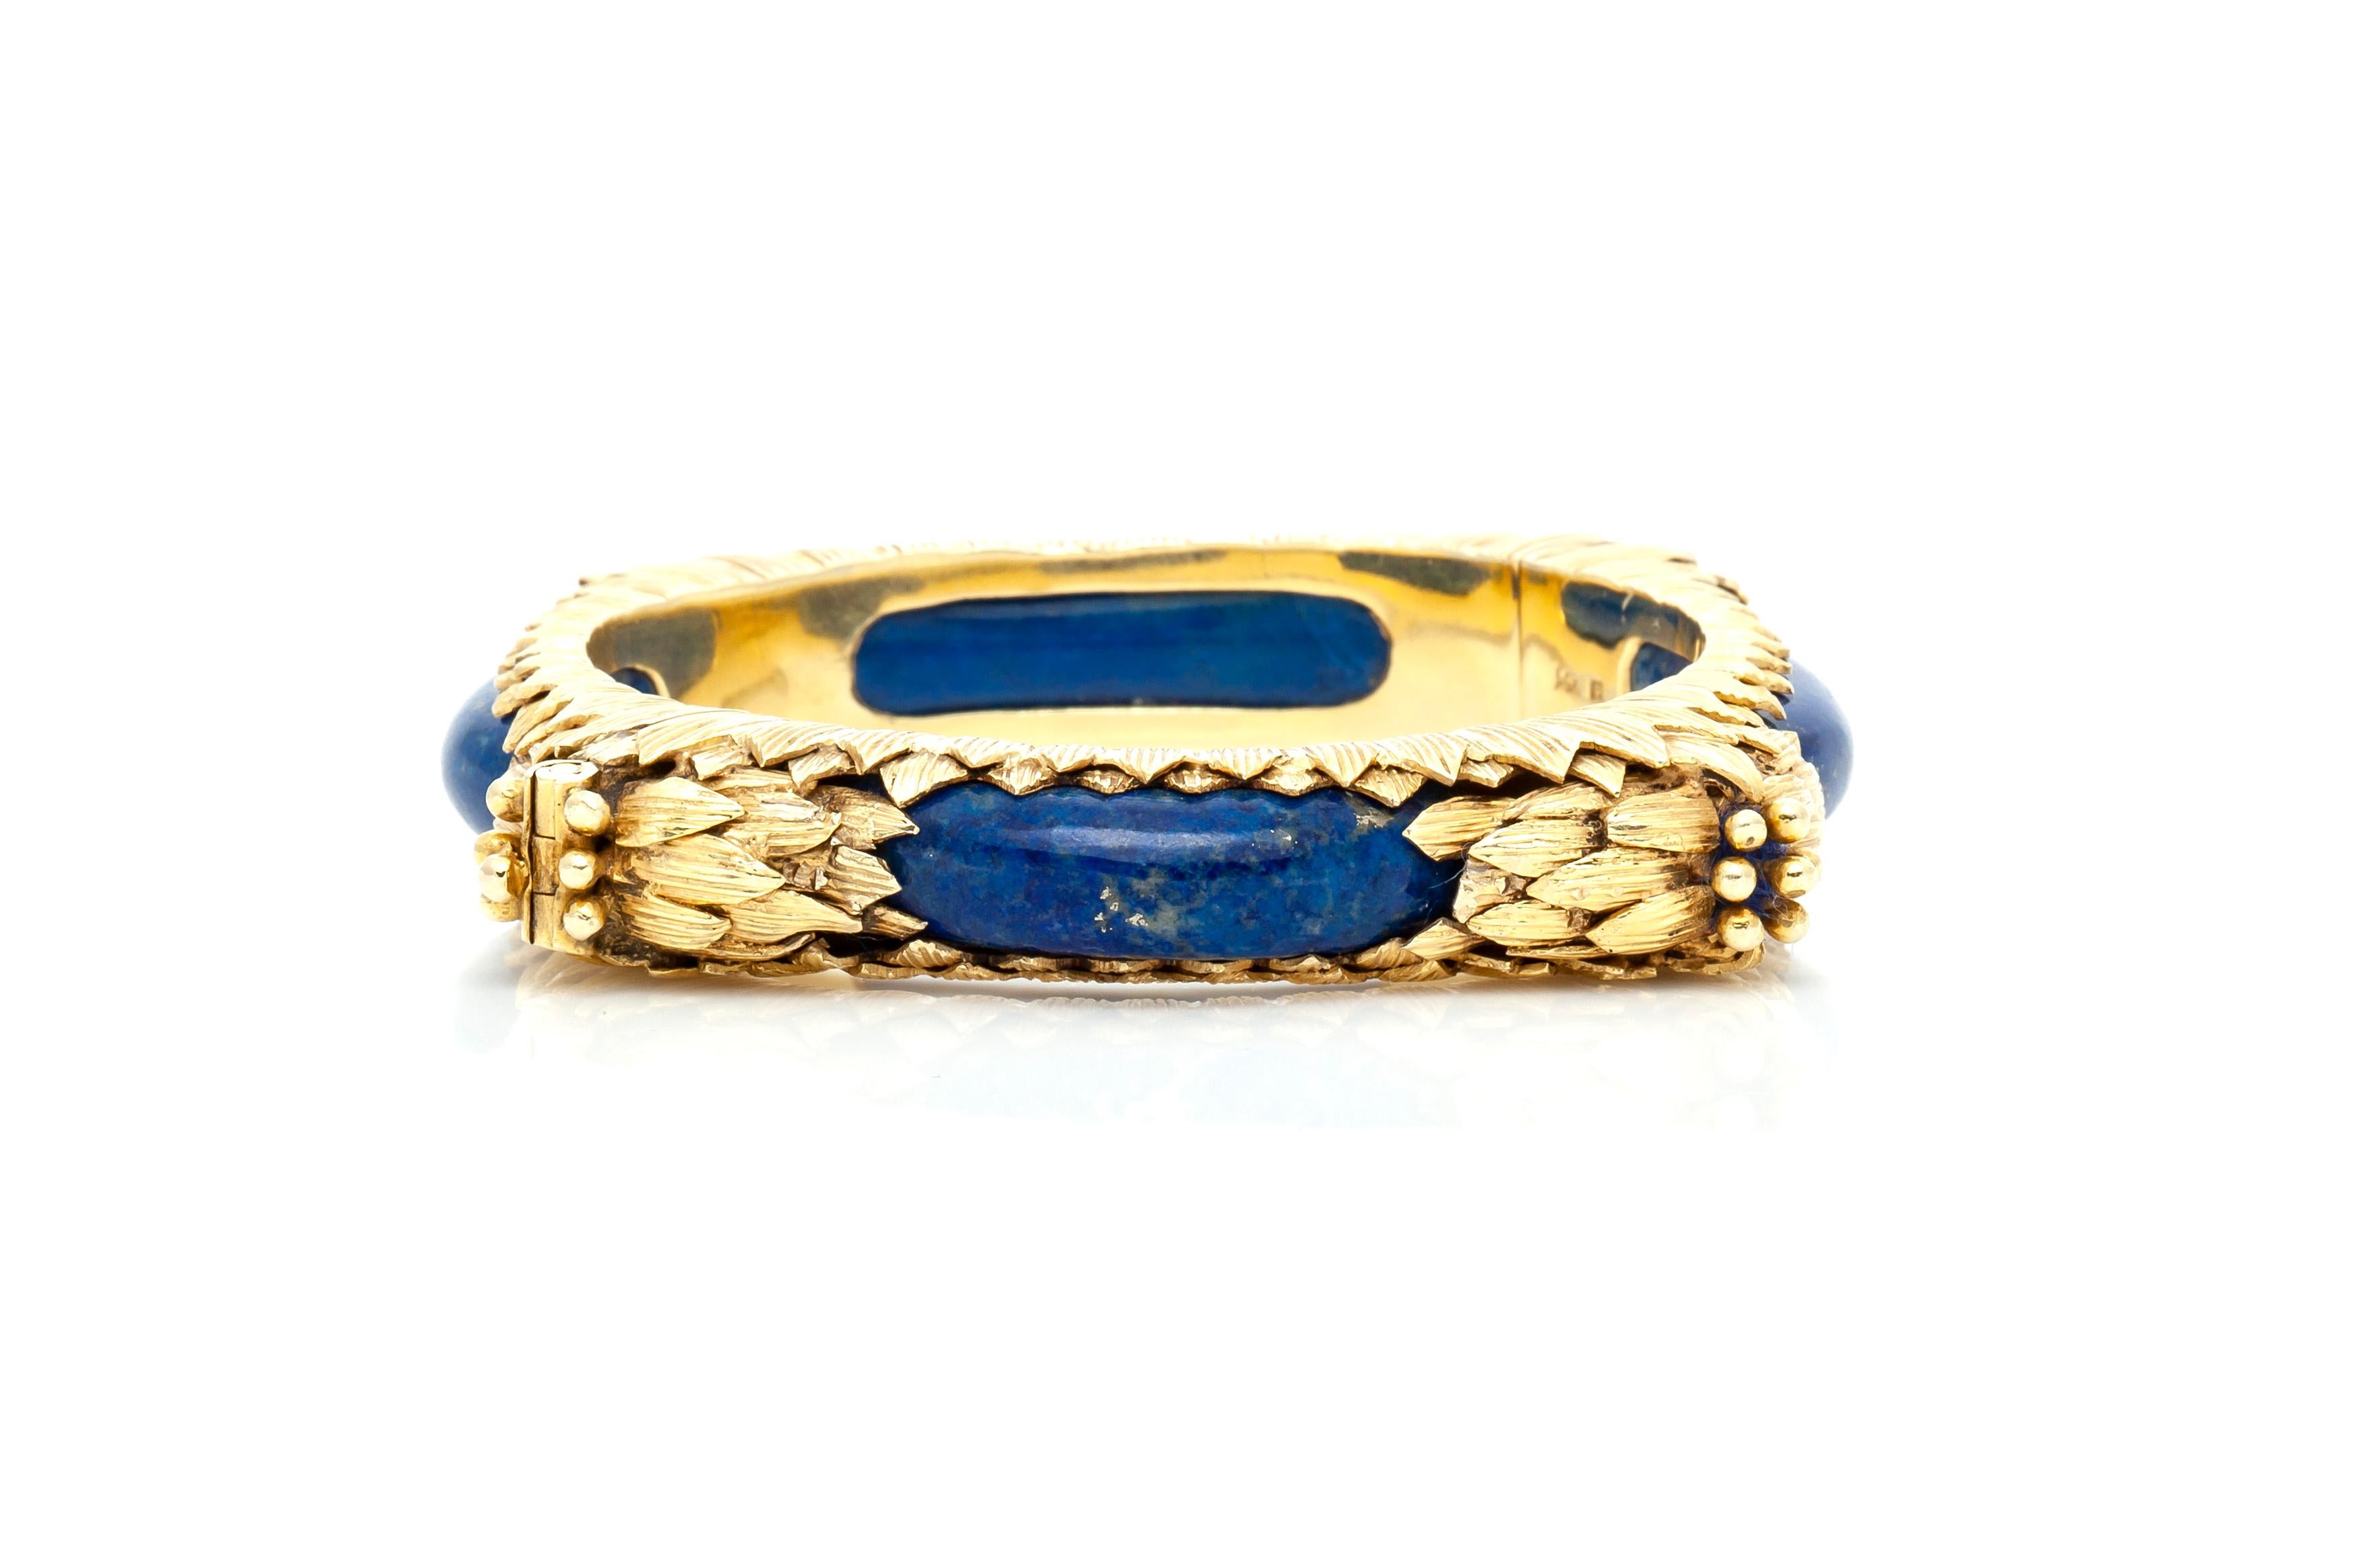 Bracelet, finely crafted in 14k yellow gold with lapis. Circa 1960's.